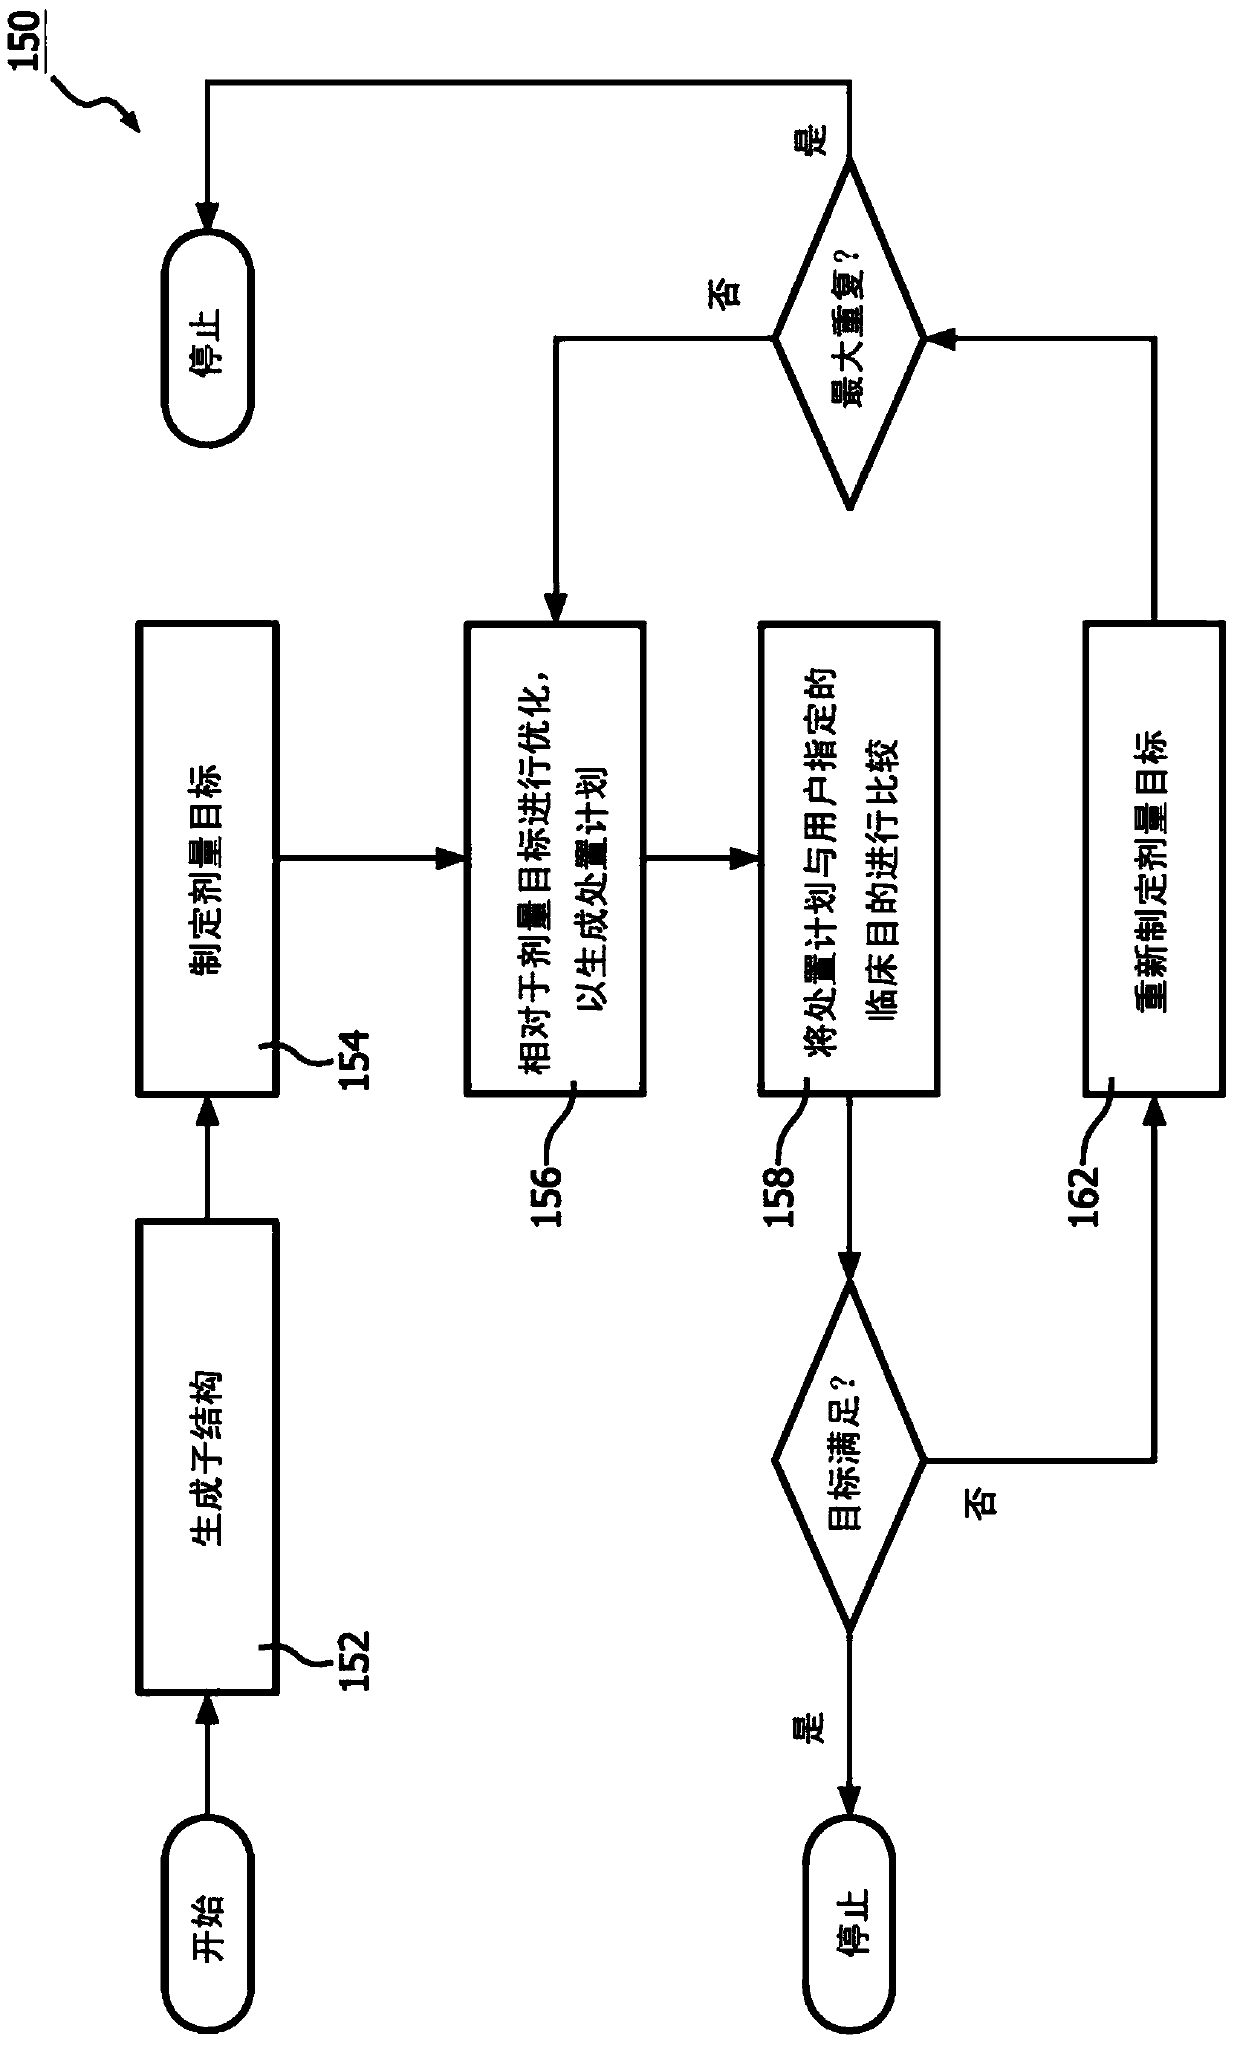 A system for automatic optimal imrt/vmat treatment plan generation